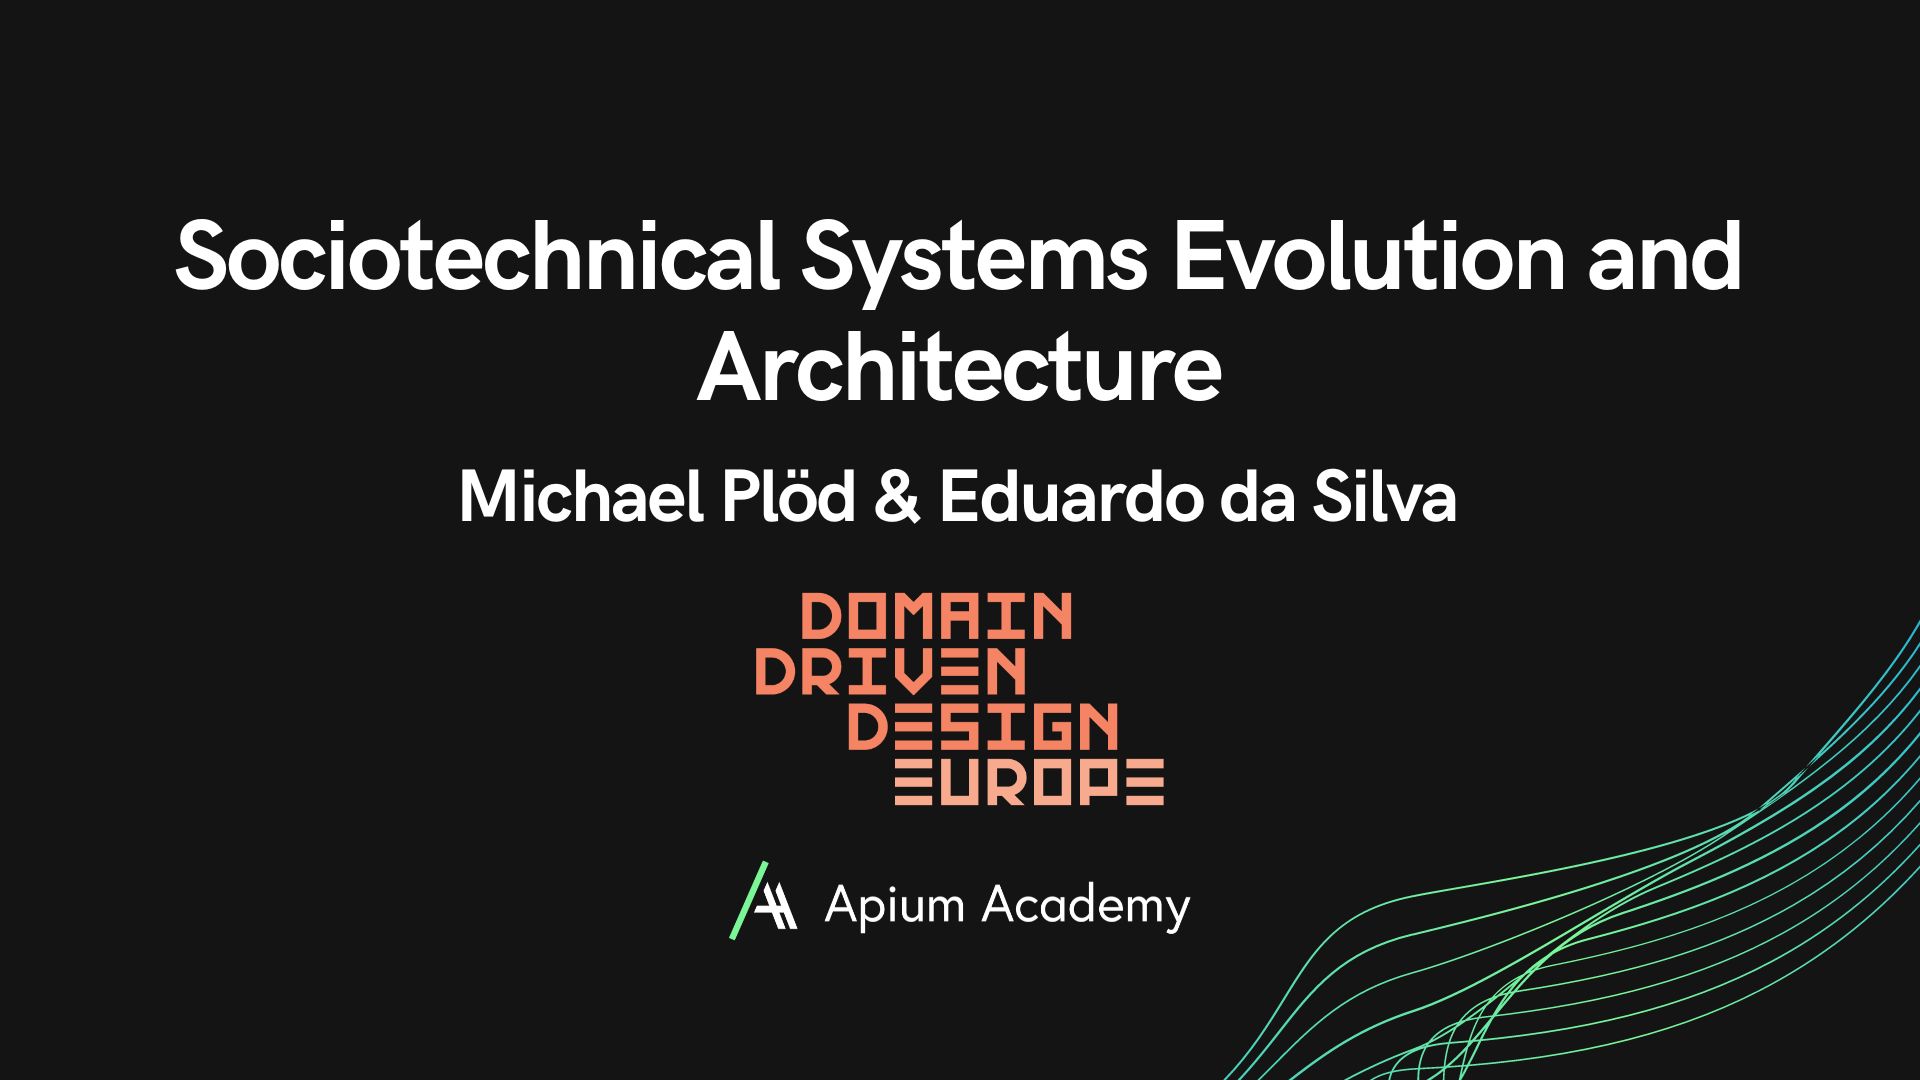 Sociotechnical Systems Evolution and Architecture